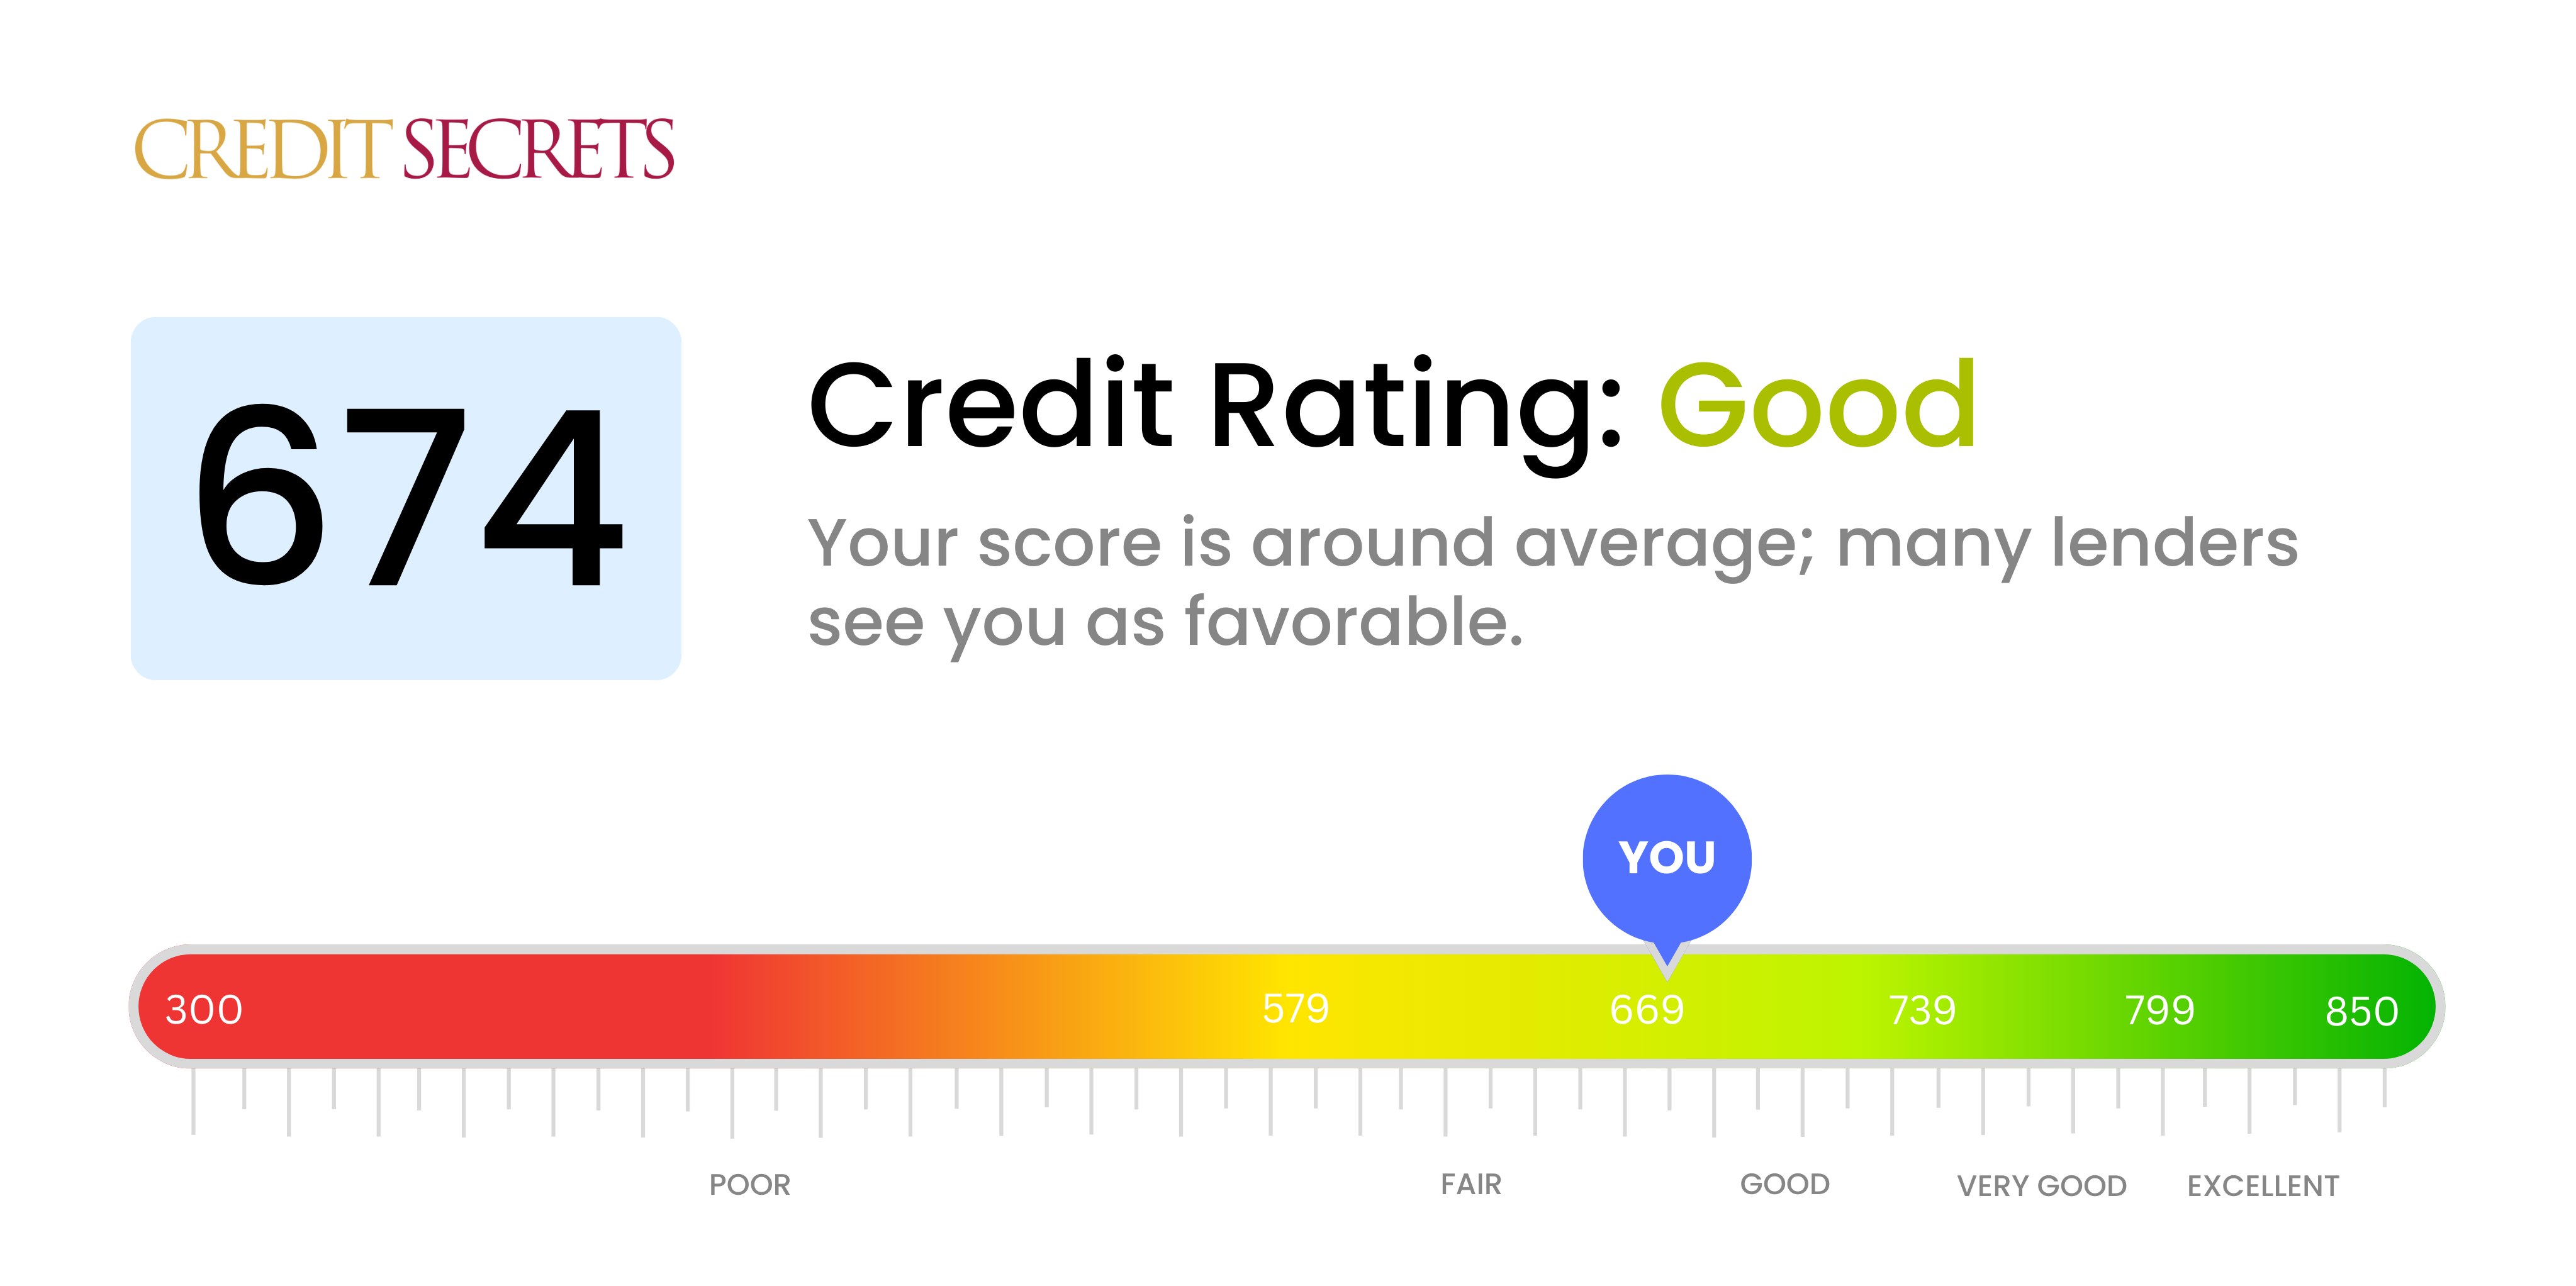 Is 674 a good credit score?